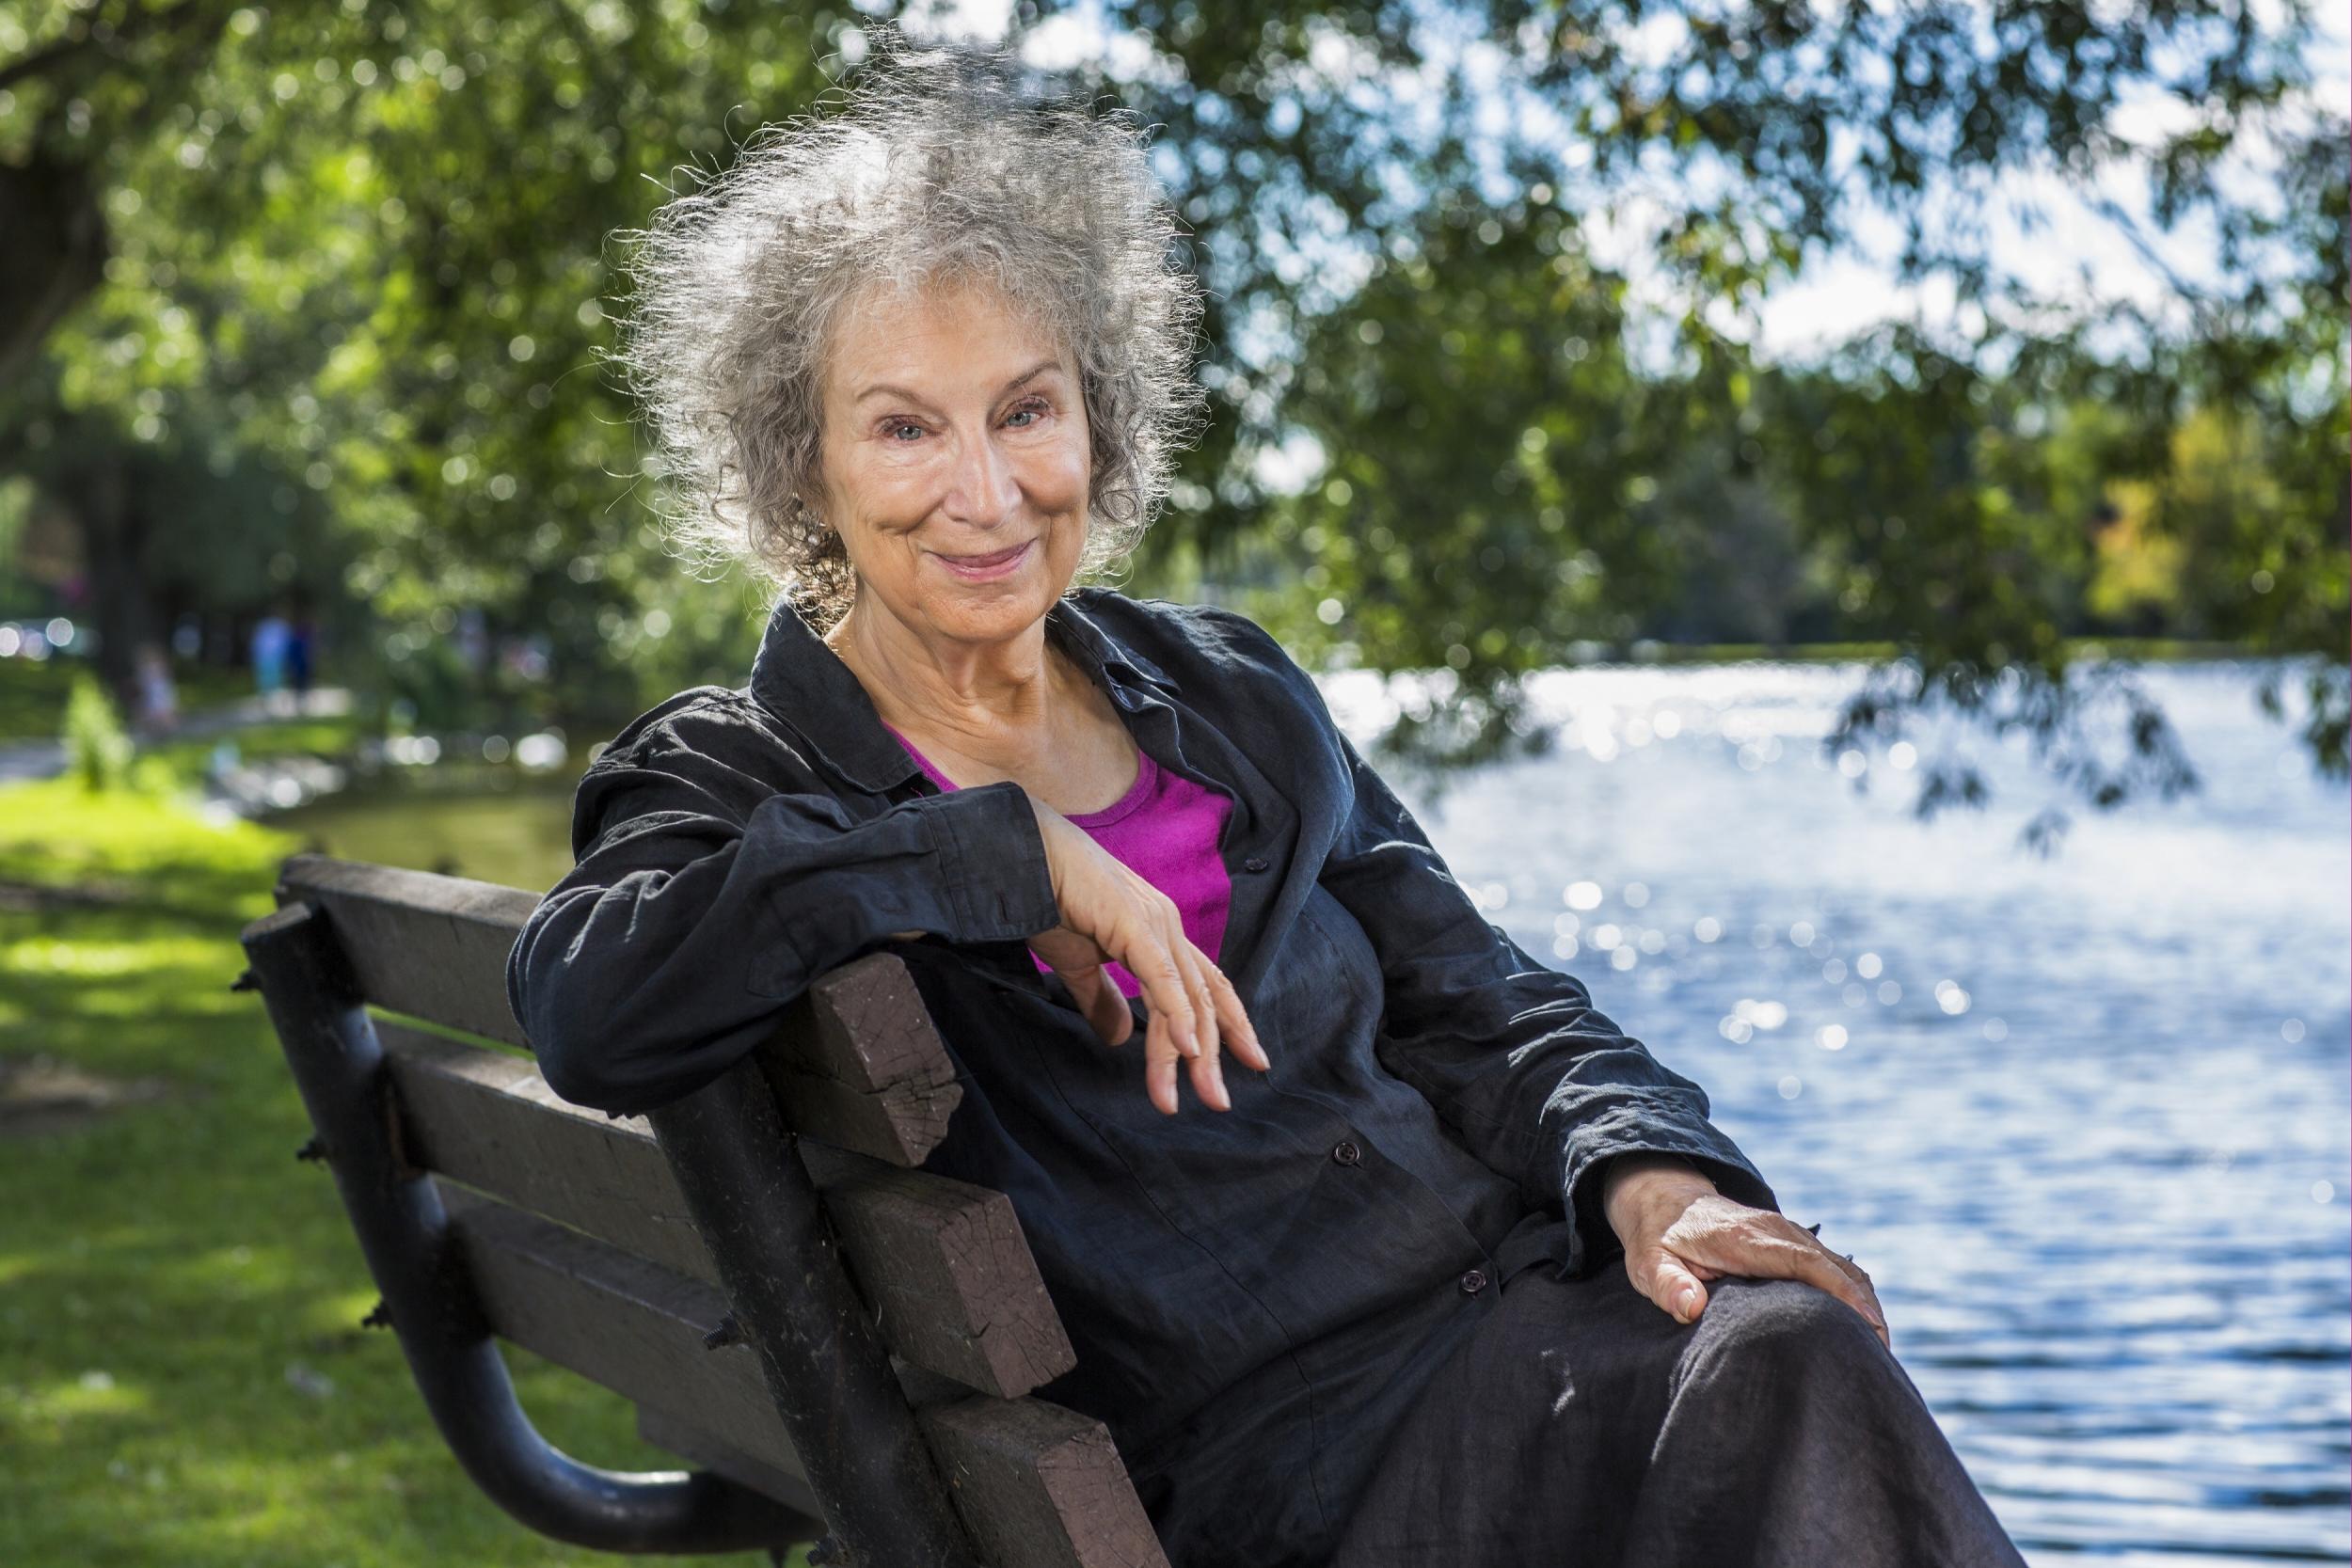 Margaret Atwood’s sequel to ‘The Handmaid’s Tale’ is in the running for the Booker Prize 2019